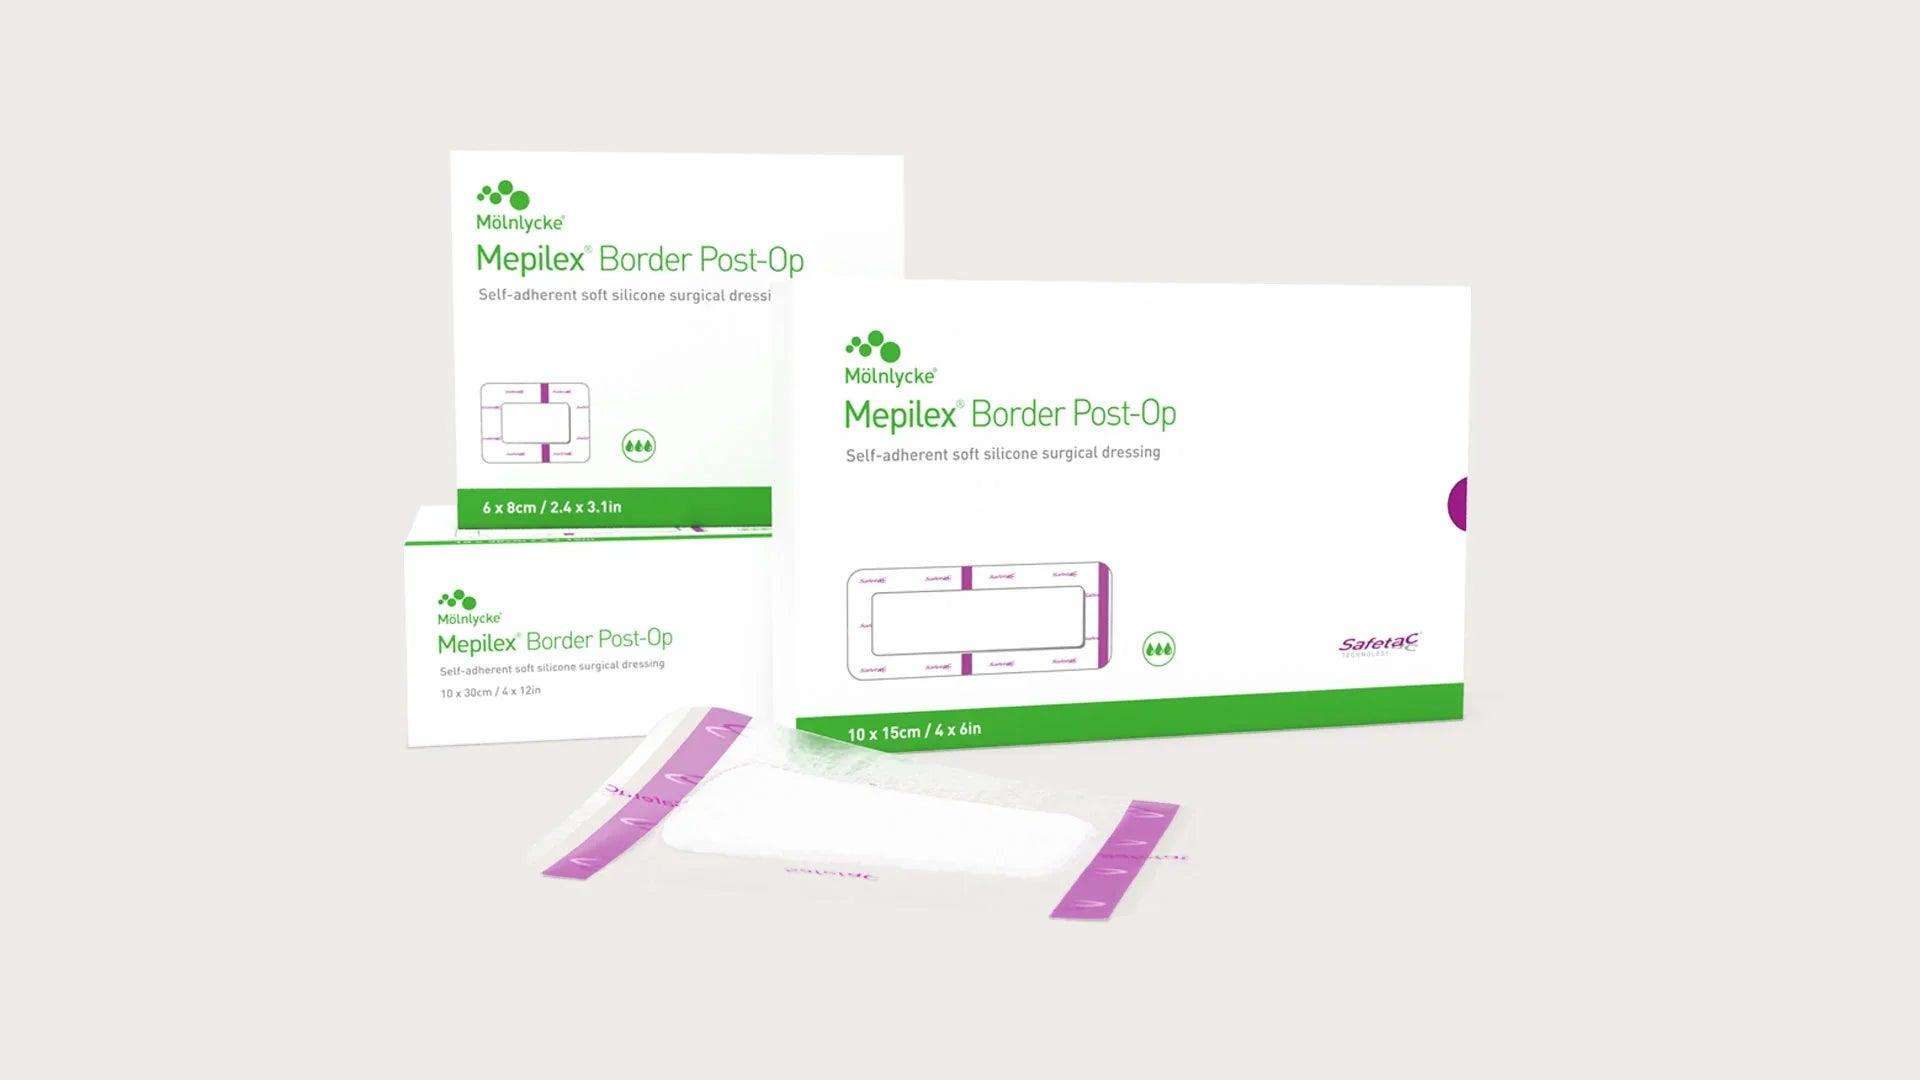 Mepilex Border Post-Op Self-adherent Soft Silicone Surgical Dressing by Molnlycke